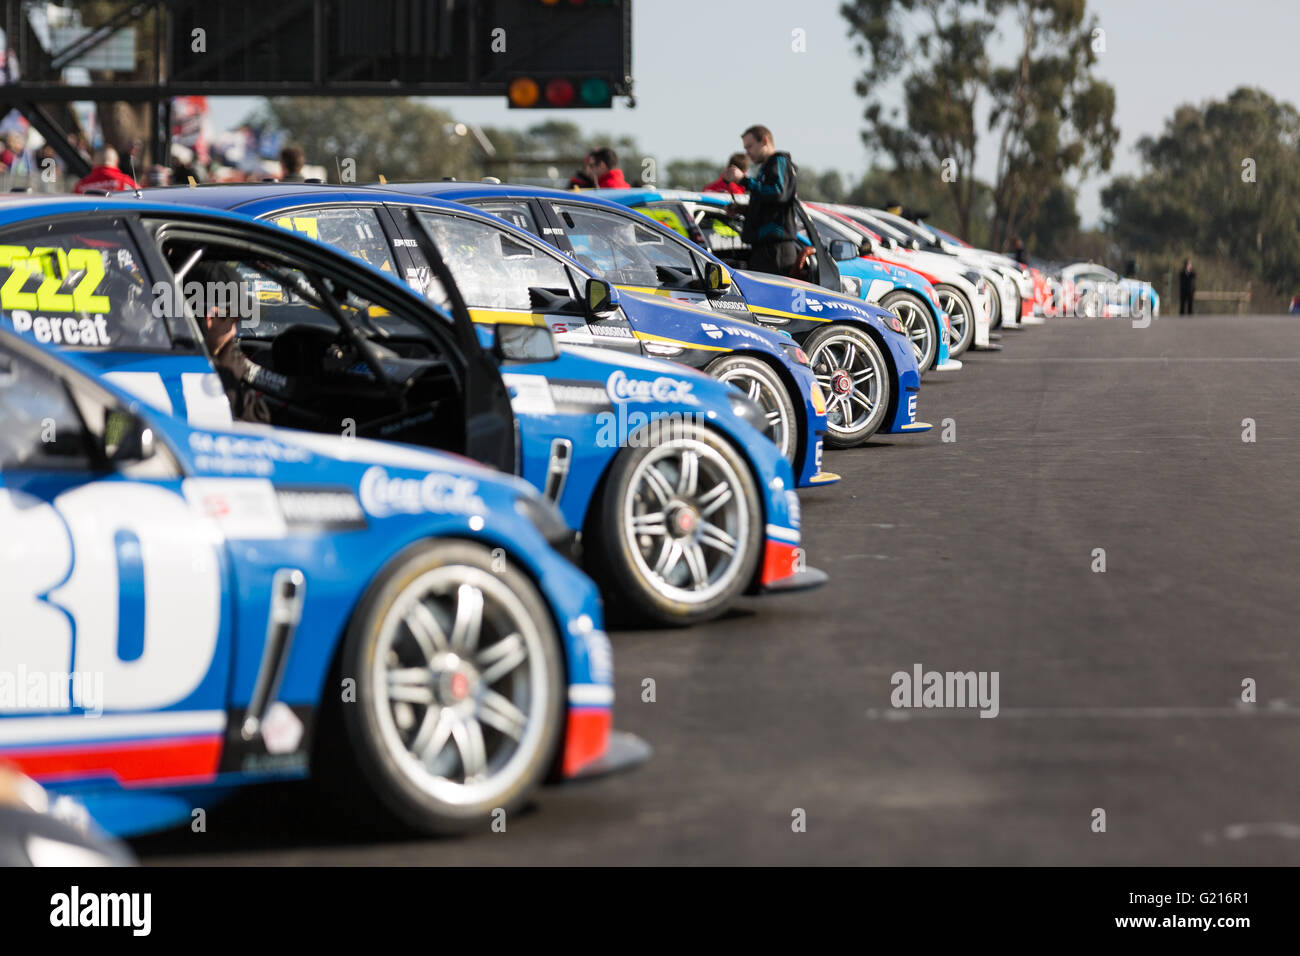 Melbourne, Australia. 22nd May, 2016. V8 Supercars on display at Winton Raceway for race 11 of the Virgin V8 Supercar Series. Credit:  David Hewison/Alamy Live News Stock Photo